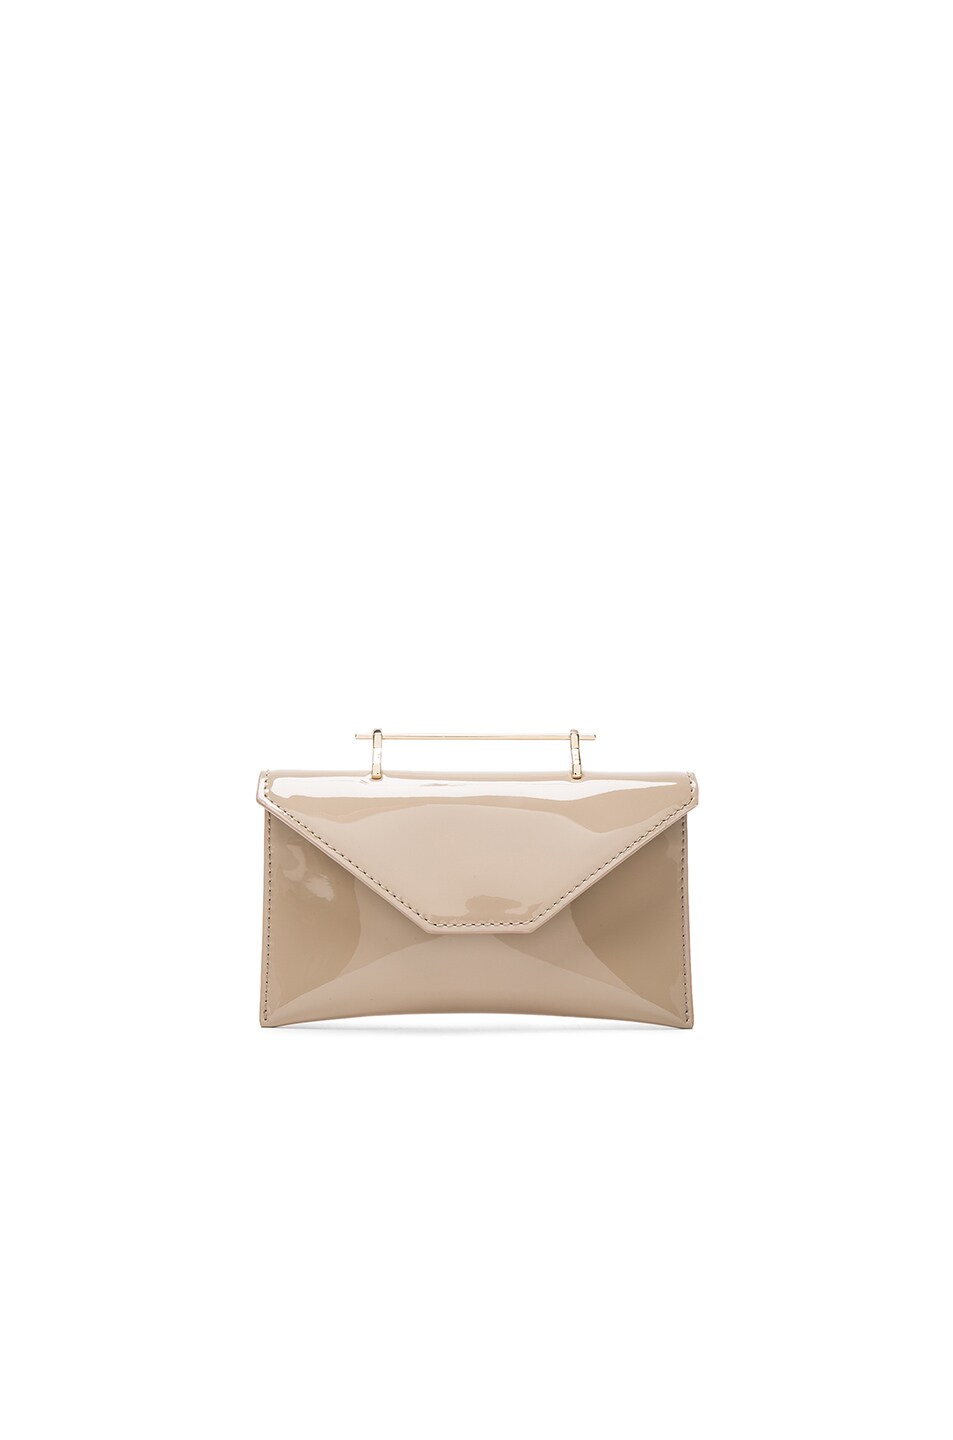 Image 1 of M2Malletier Anabelle Bag in Taupe Patent